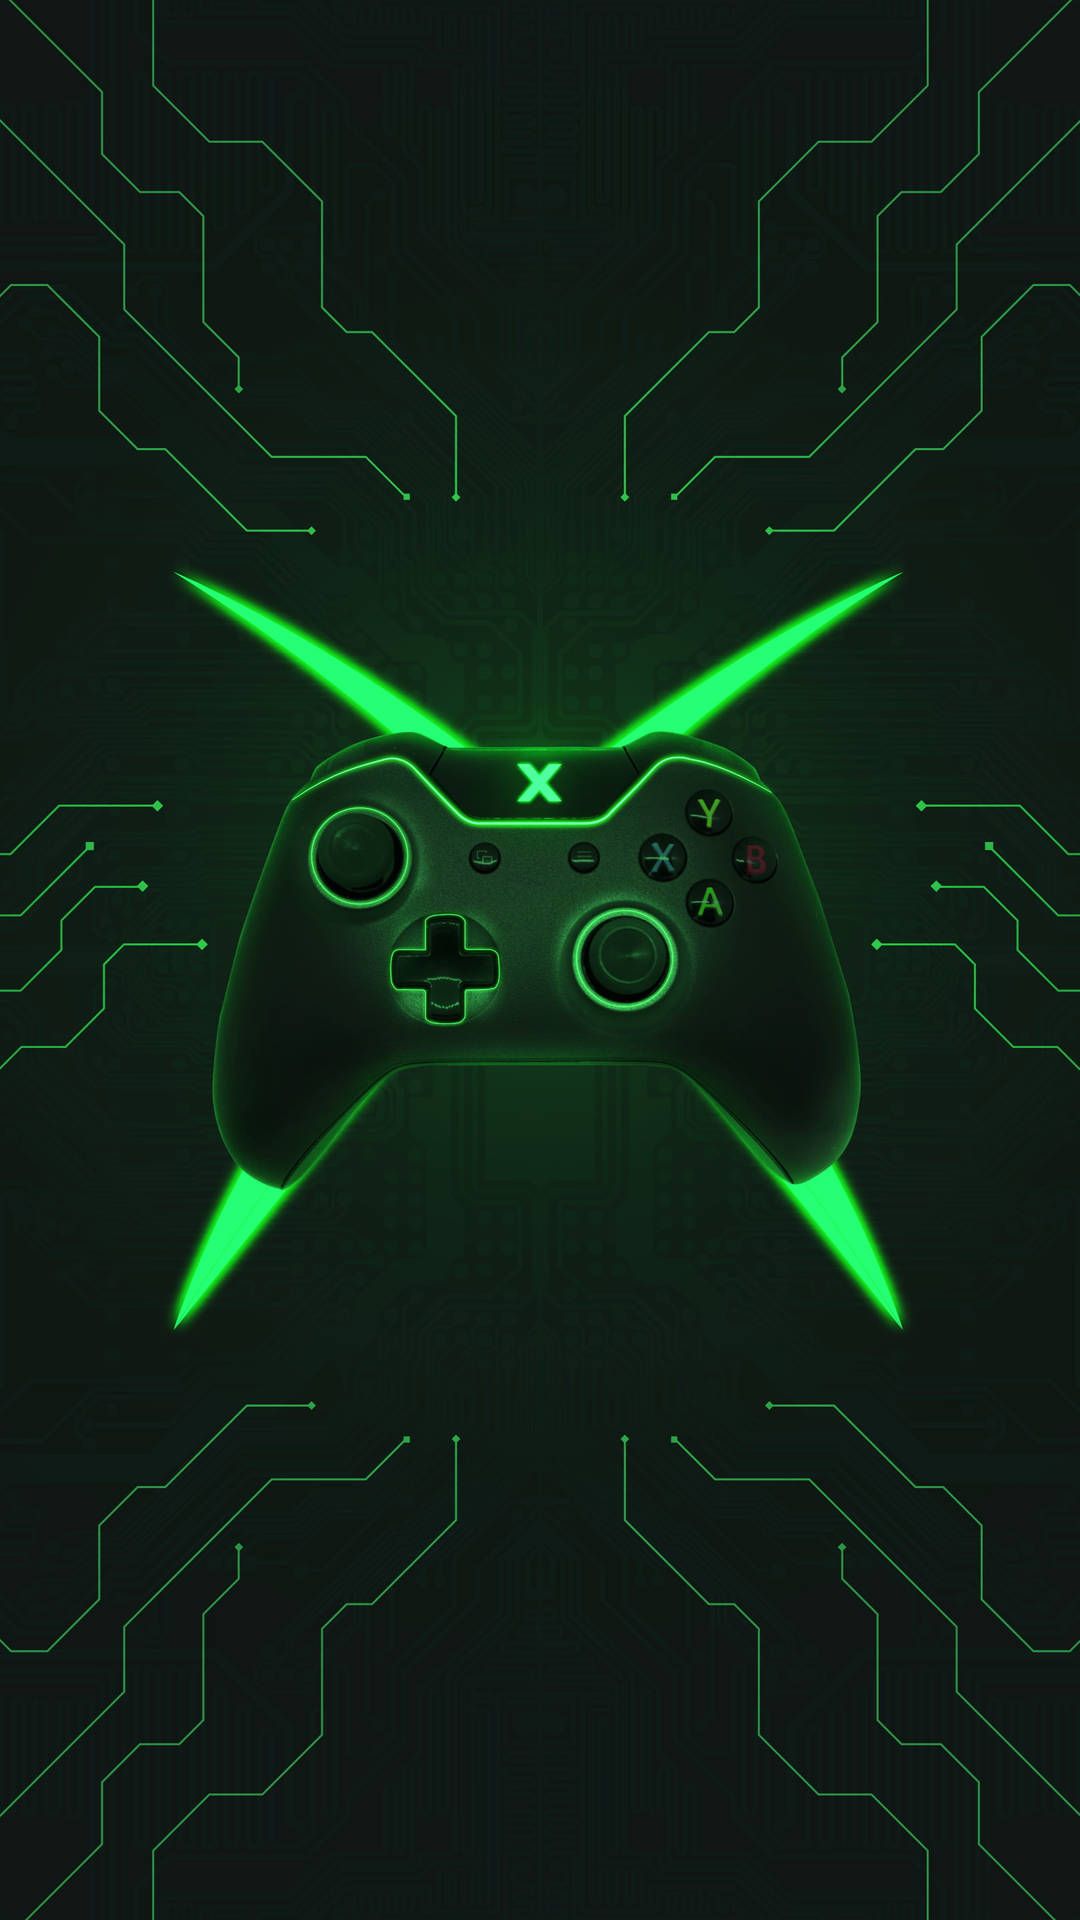 IPhone wallpaper with a neon Xbox controller - Gaming